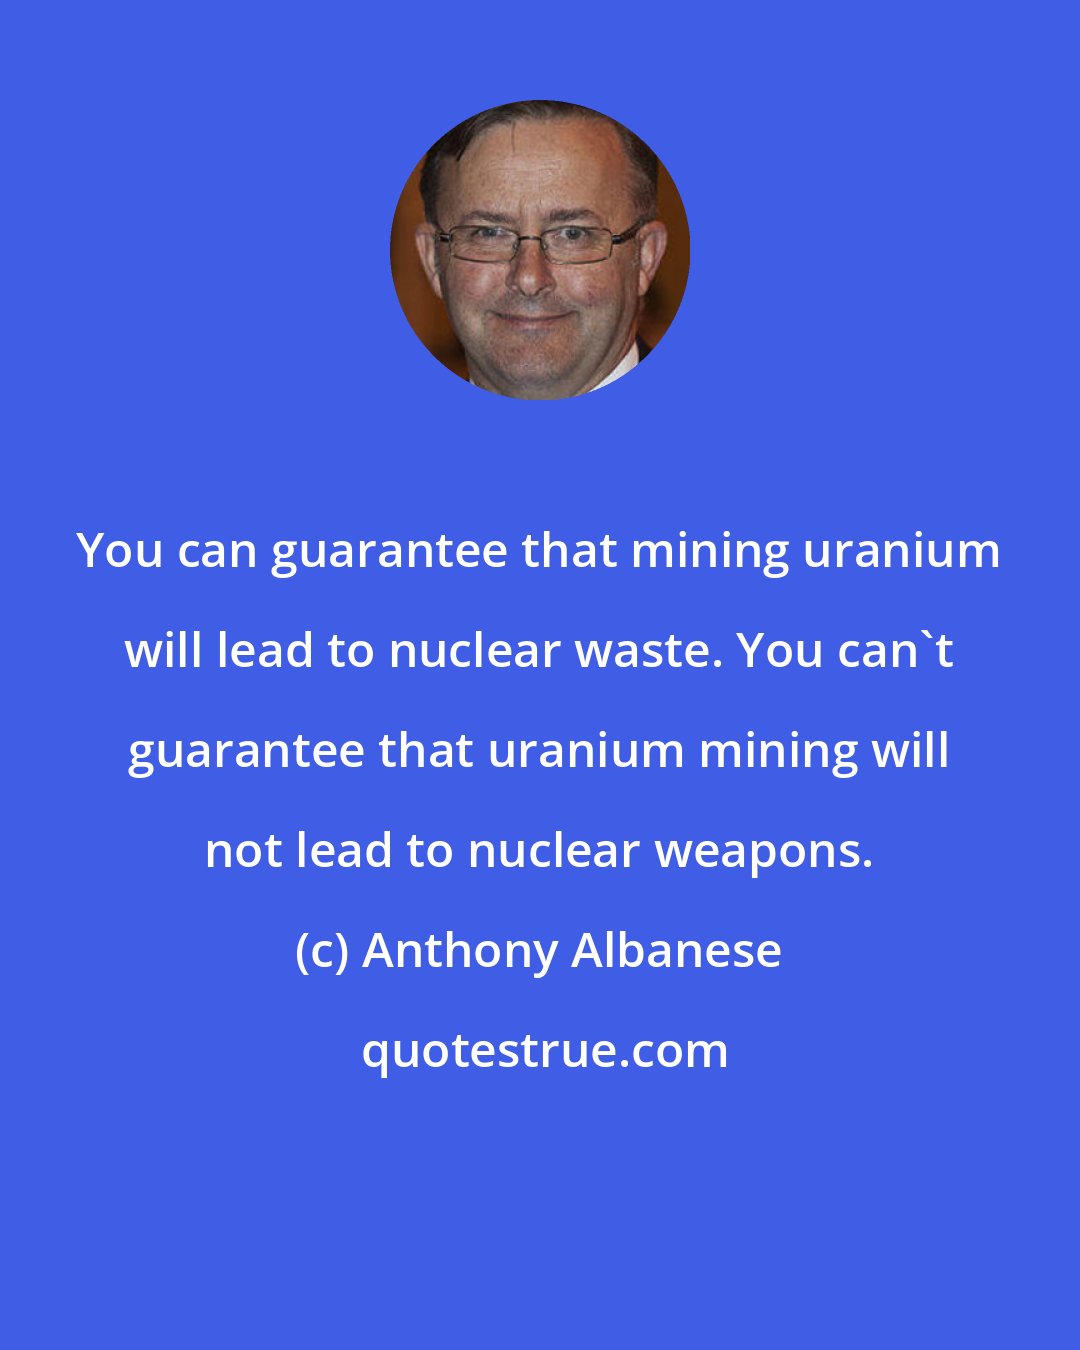 Anthony Albanese: You can guarantee that mining uranium will lead to nuclear waste. You can't guarantee that uranium mining will not lead to nuclear weapons.